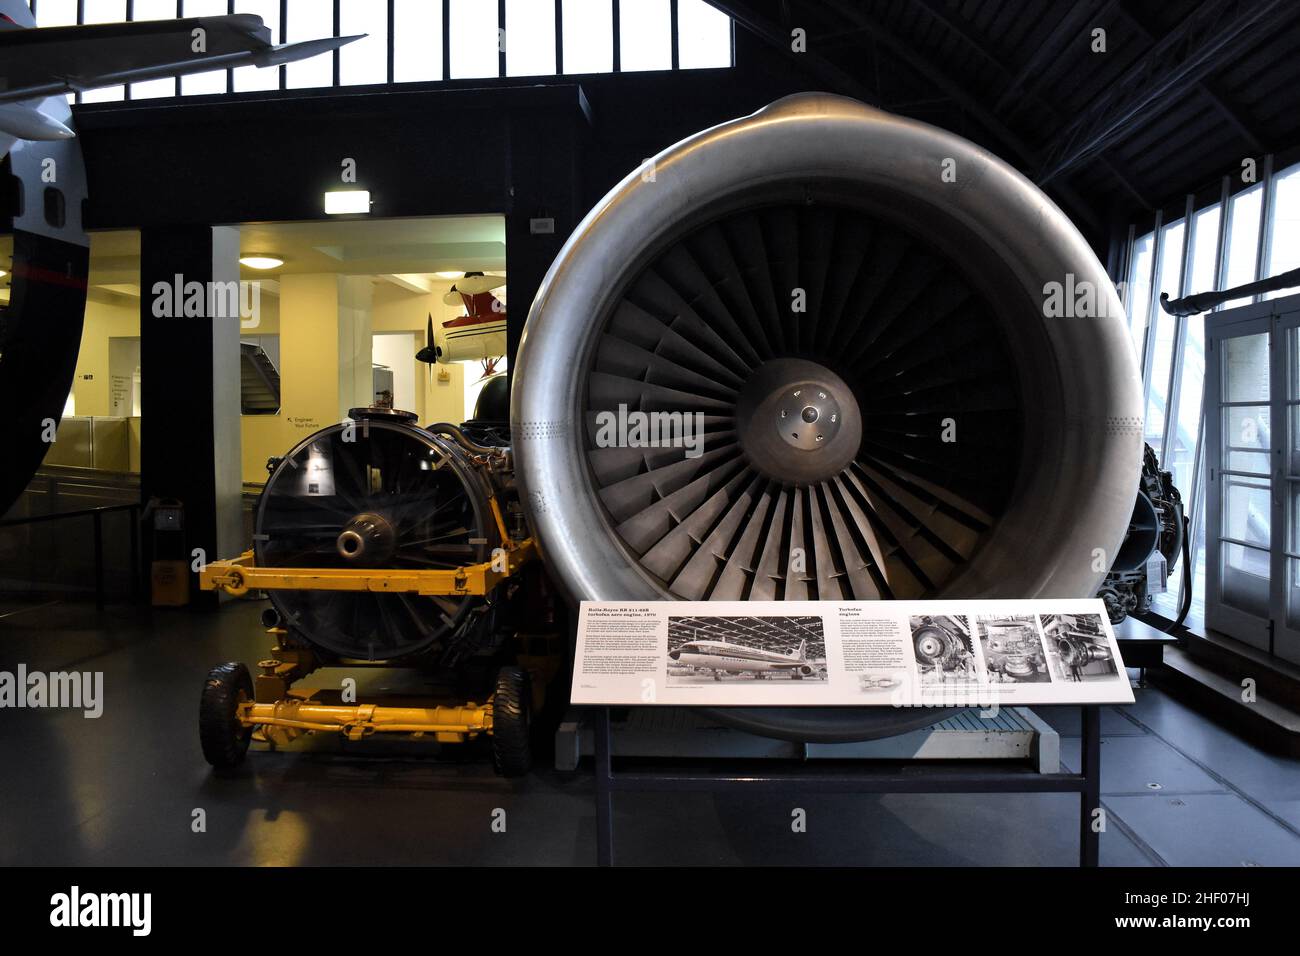 The Rolls-Royce RB211 - turbofan jet engine displayed at Science Museum in London UK. Stock Photo